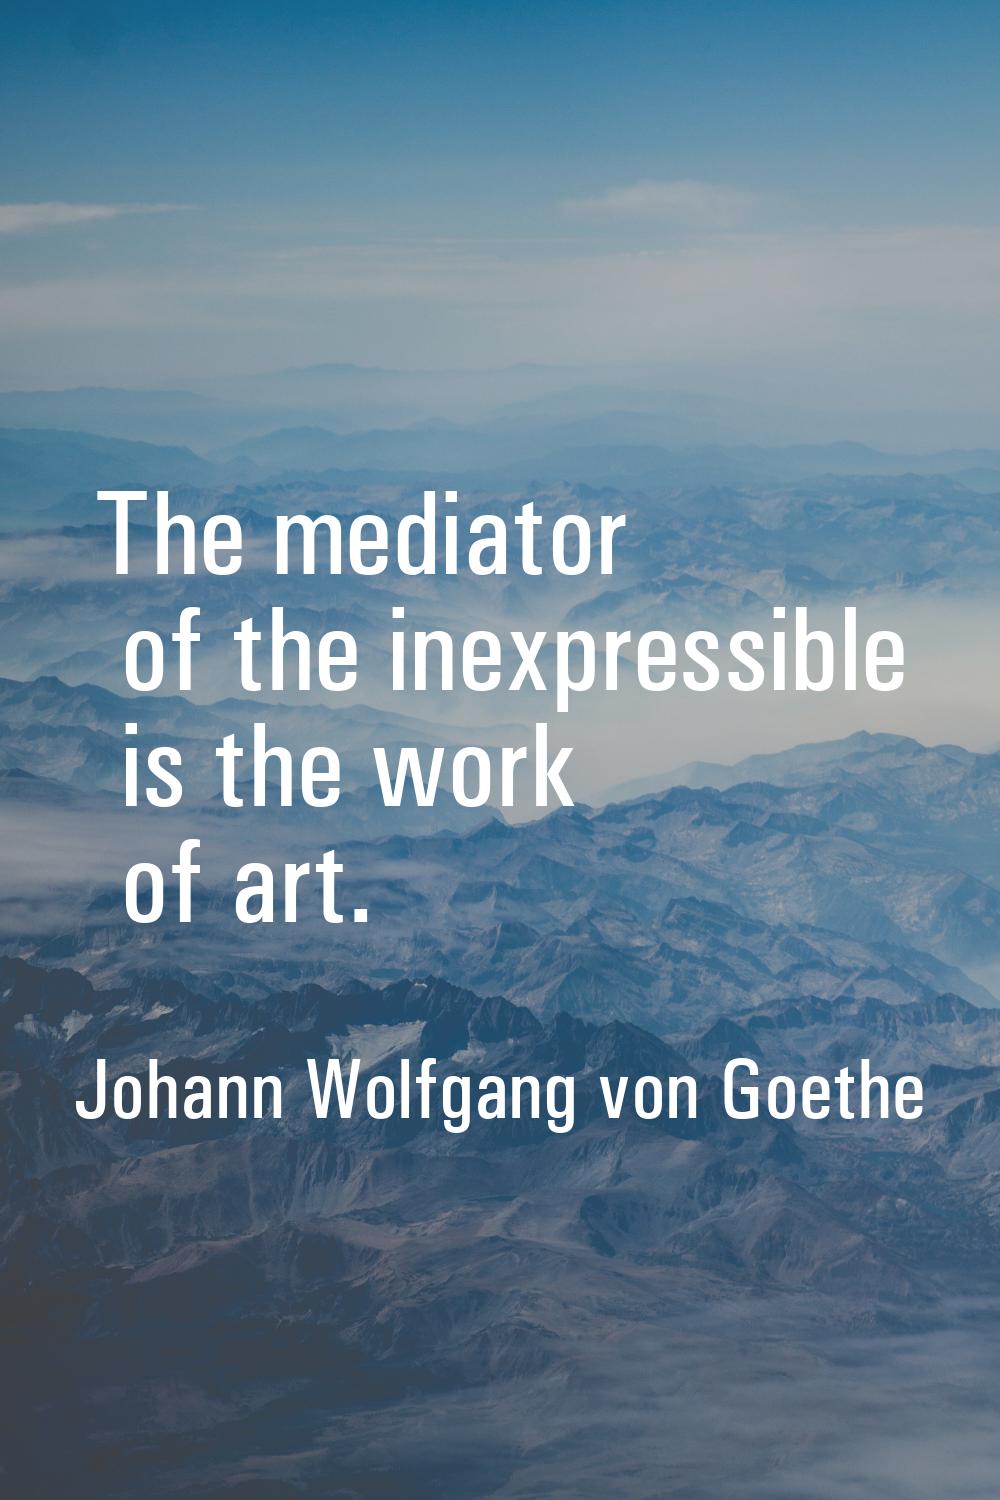 The mediator of the inexpressible is the work of art.